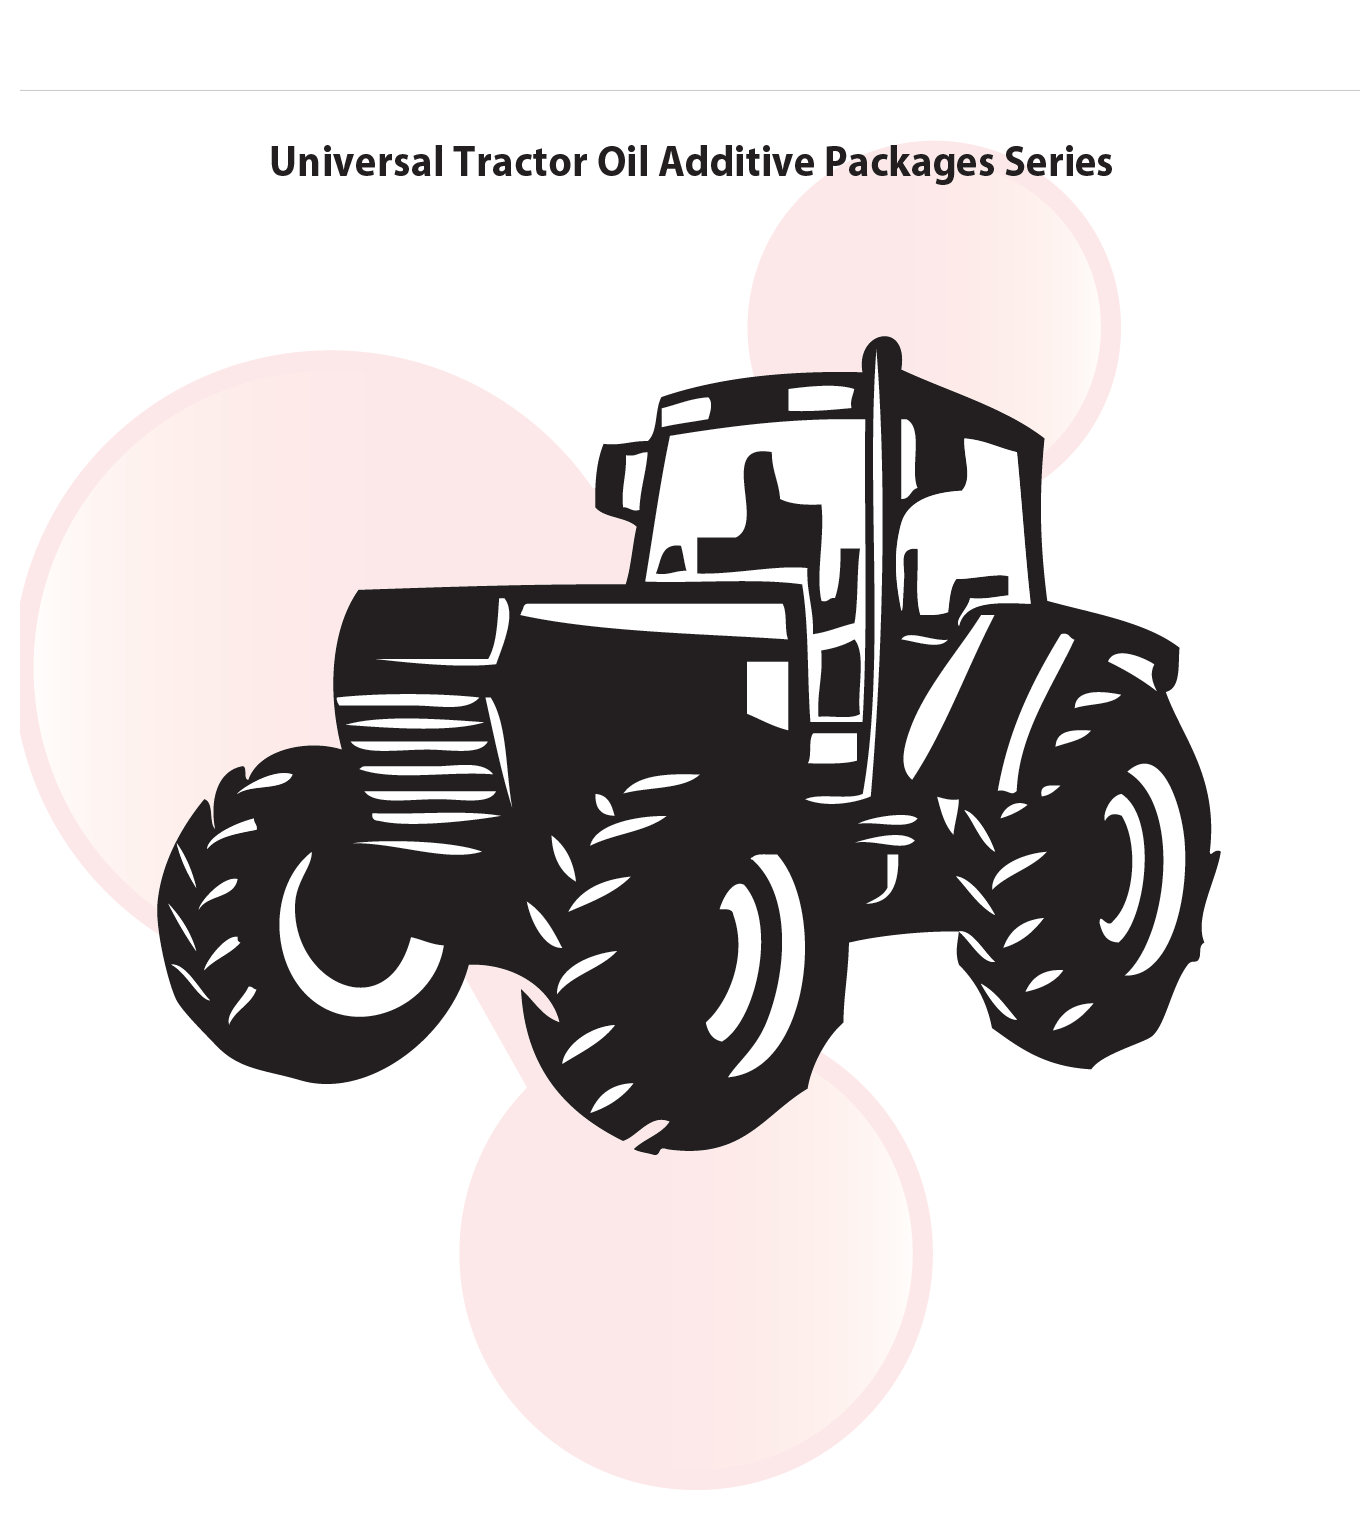 Universal Tractor Oil Additive Packages Series